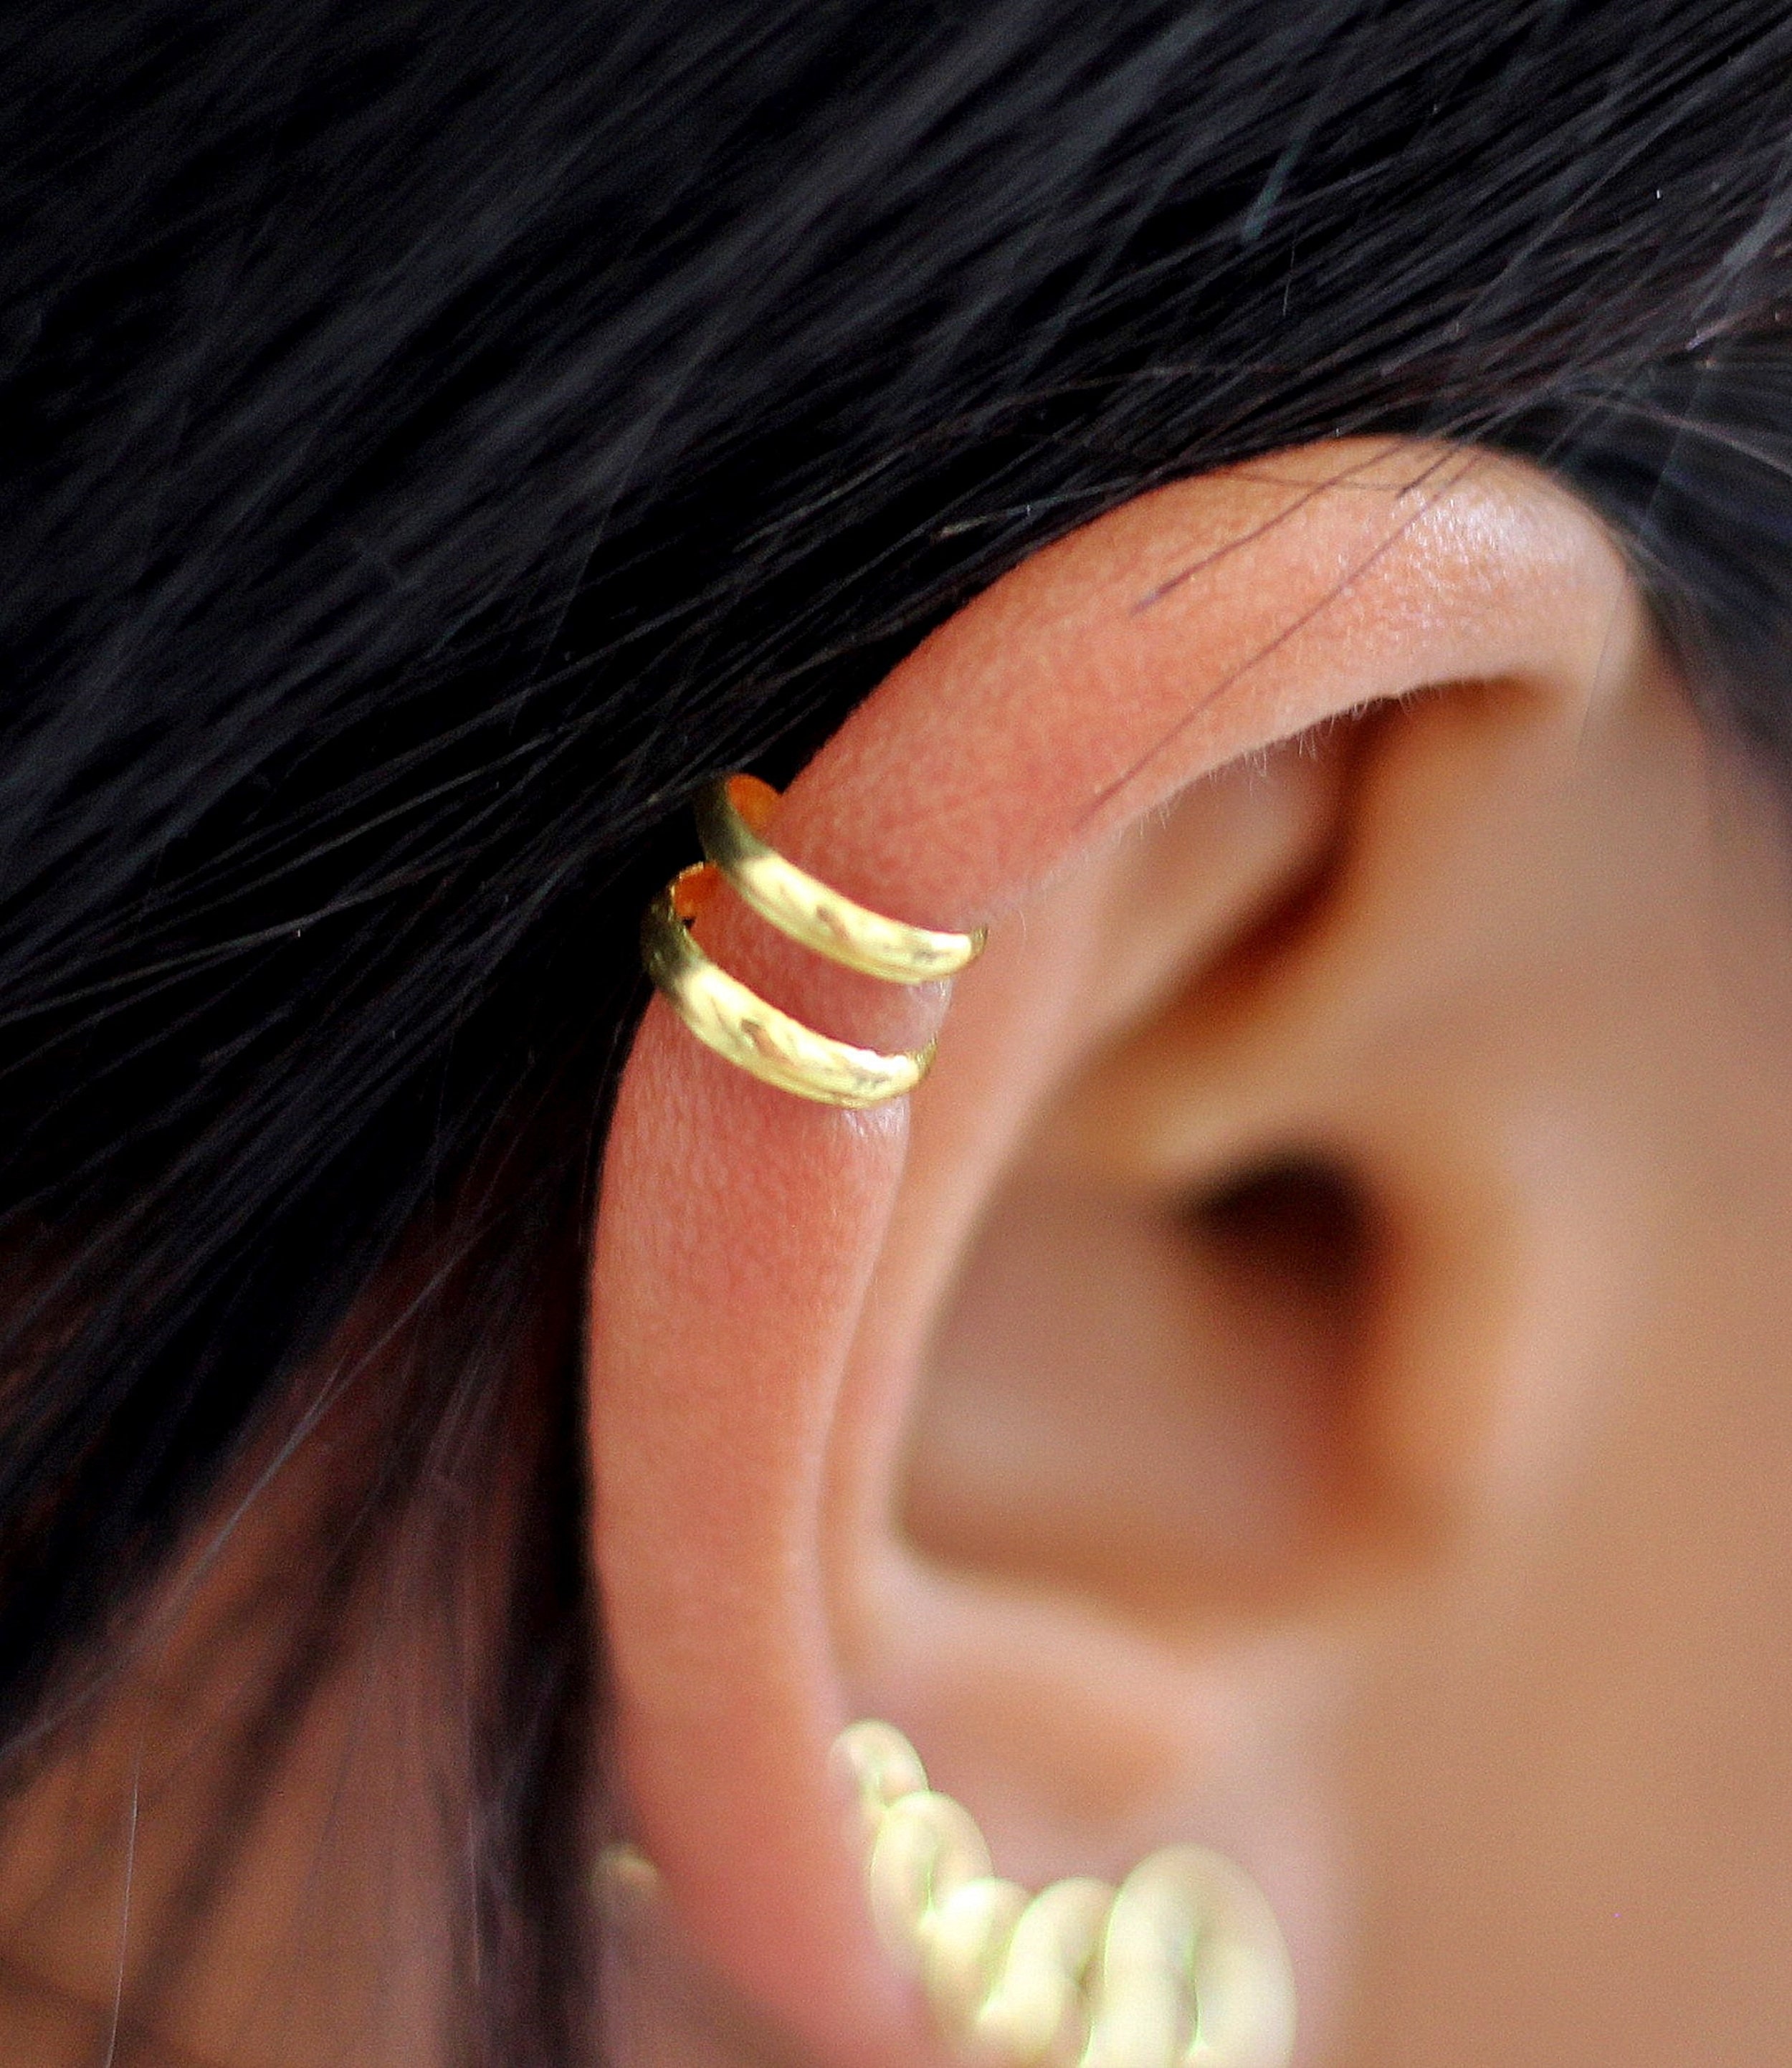 Buy Fake Helix Piercing for No Pierced Ears Helix Cuff No Online in India   Etsy